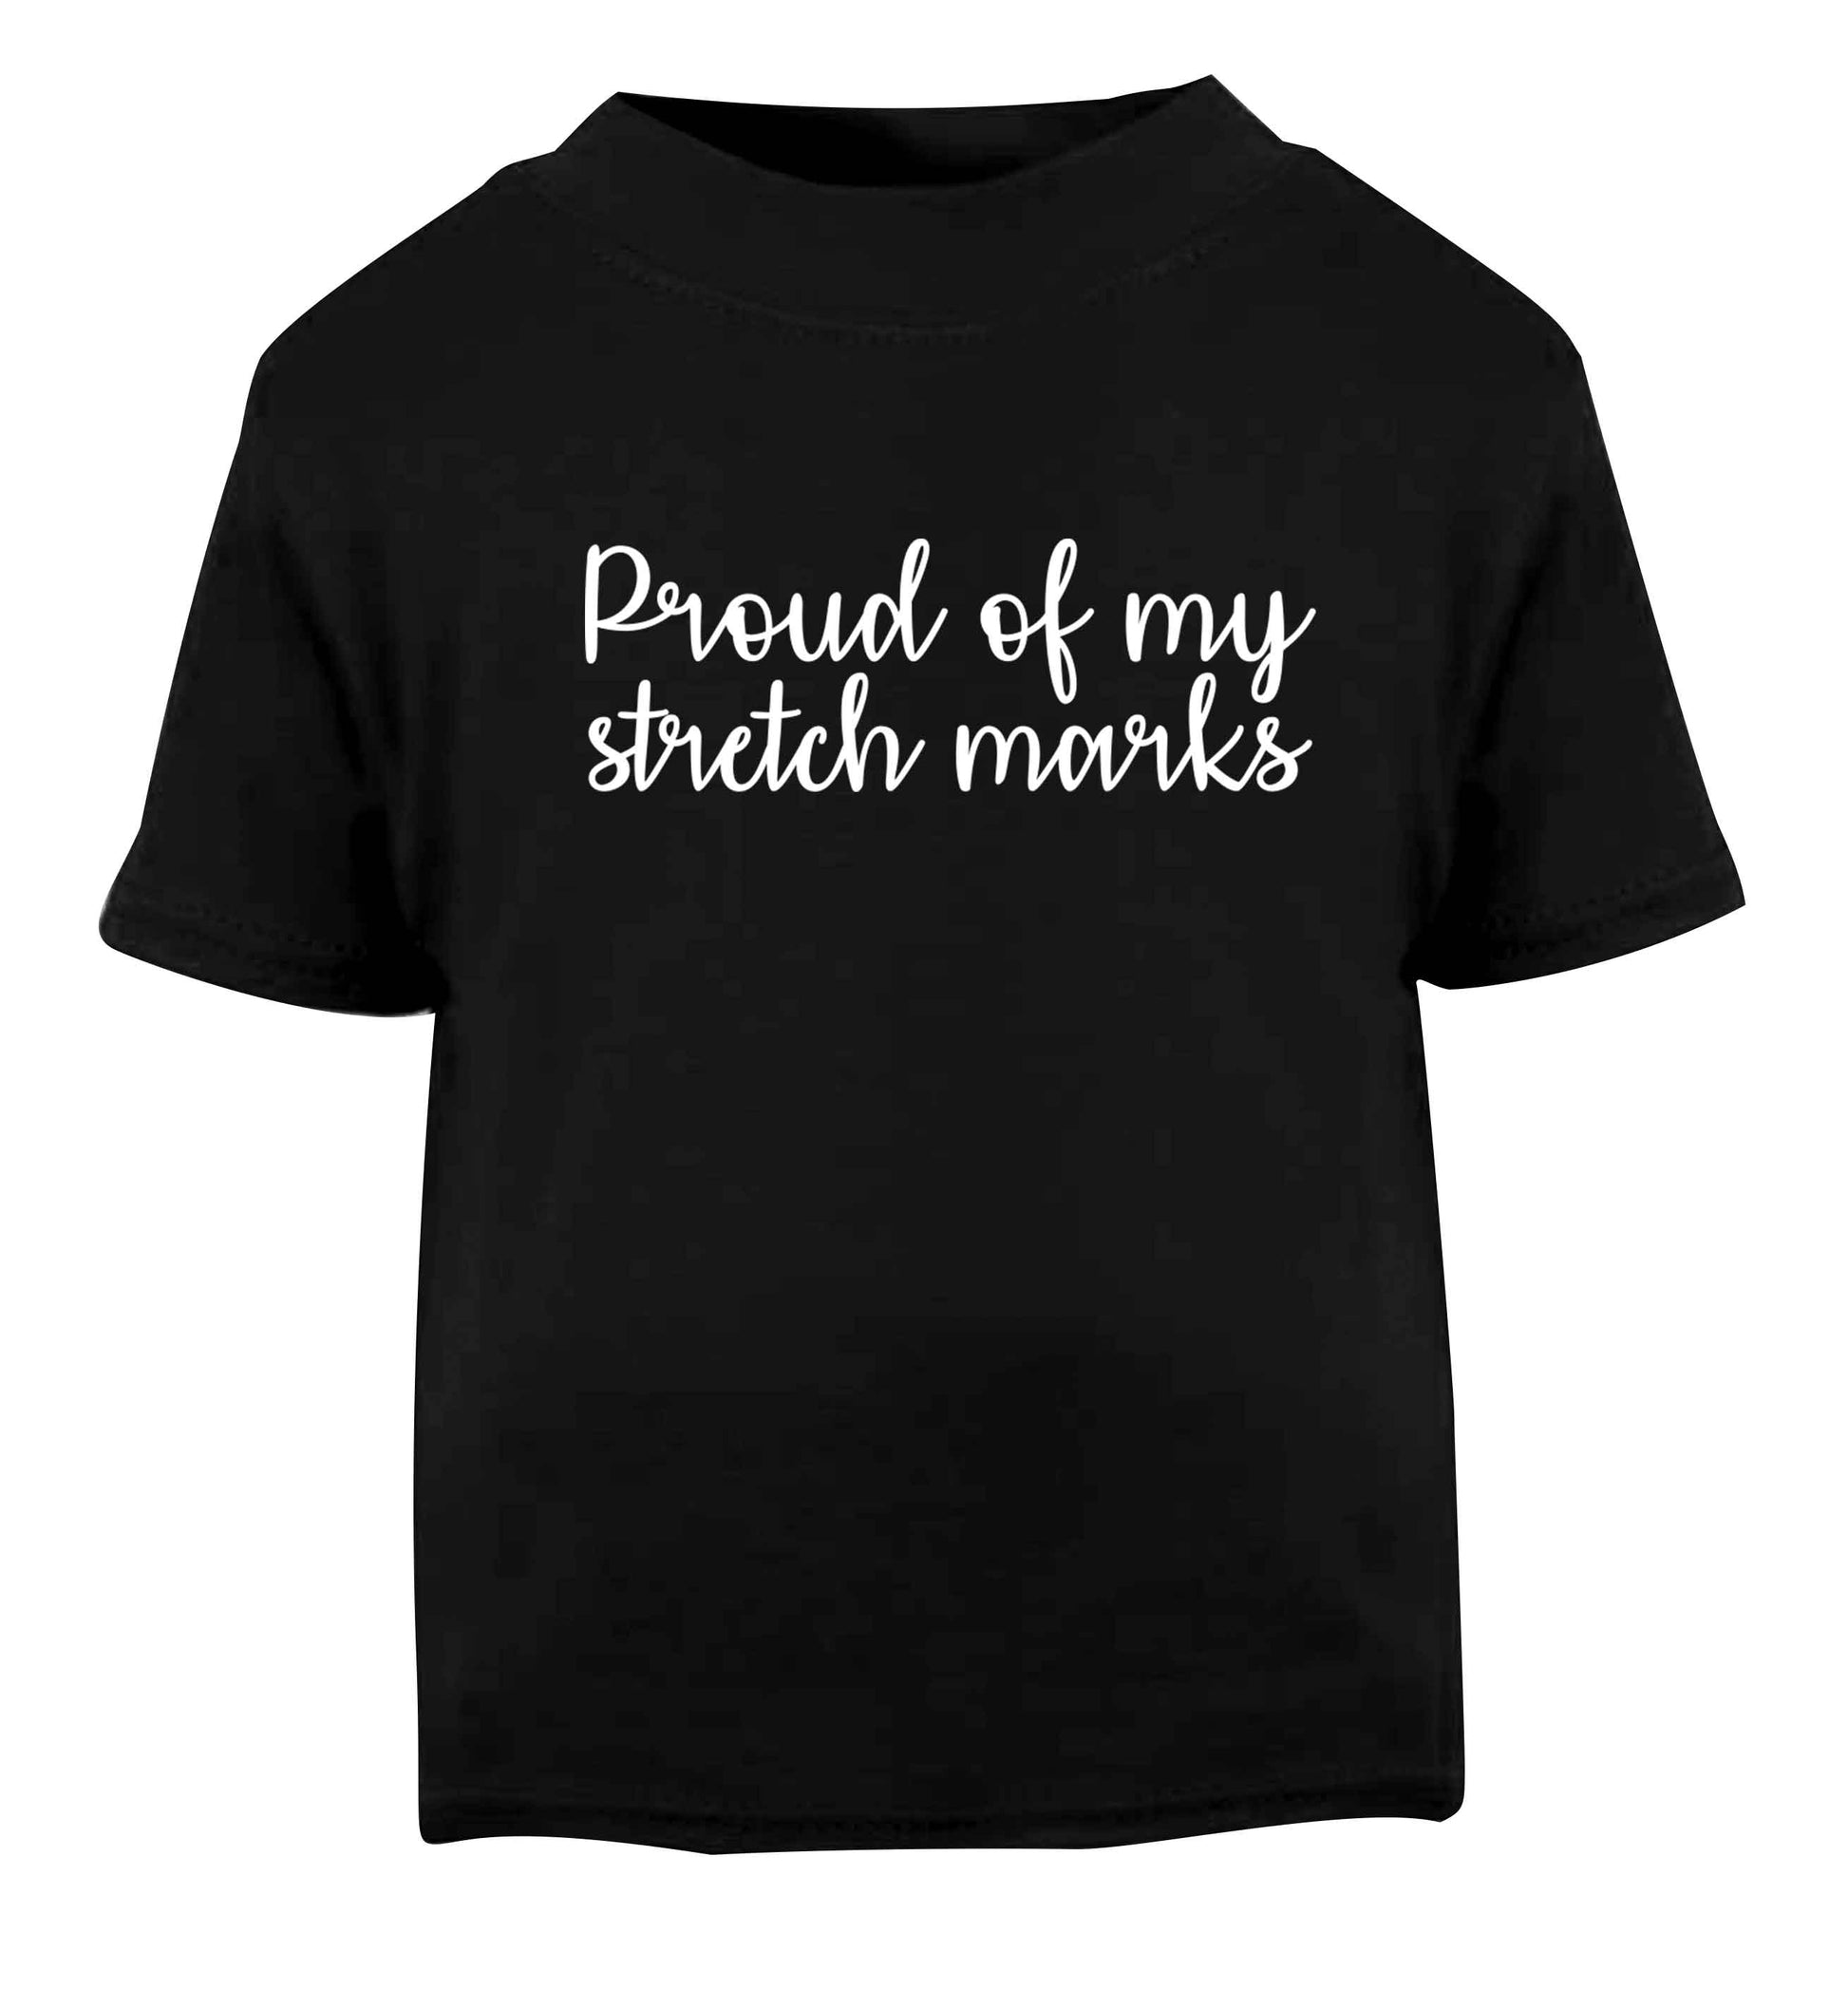 Proud of my stretch marks Black baby toddler Tshirt 2 years